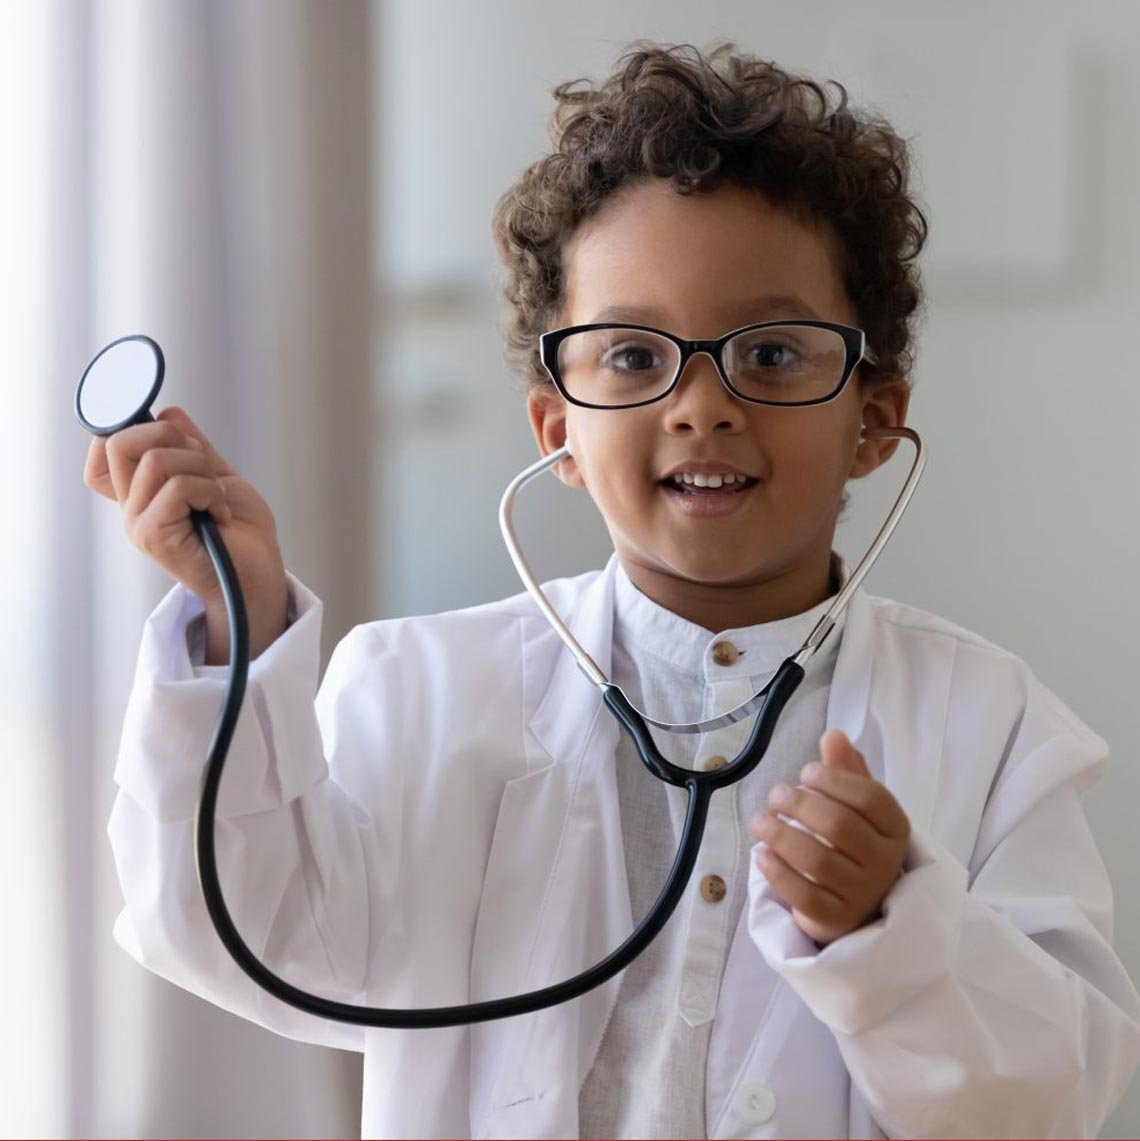 Child with doctor coat and stethoscope.